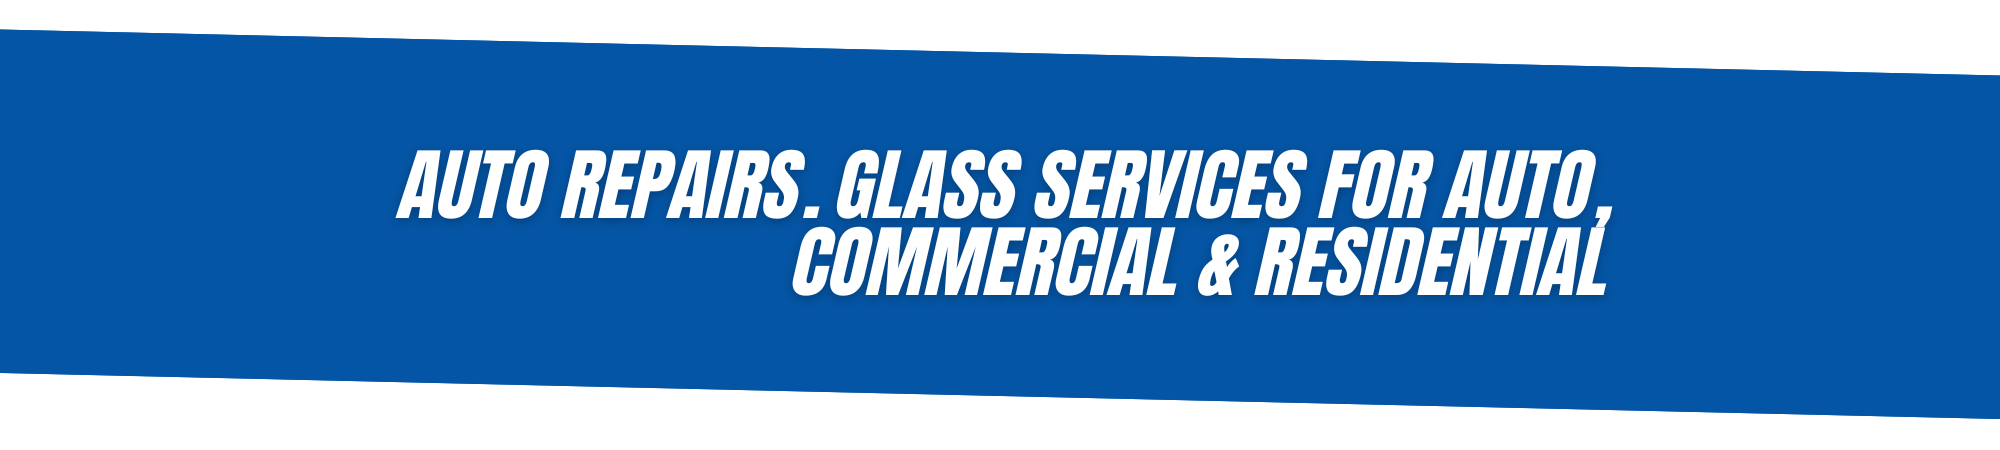 glass repairs for auto, commercial, and residential